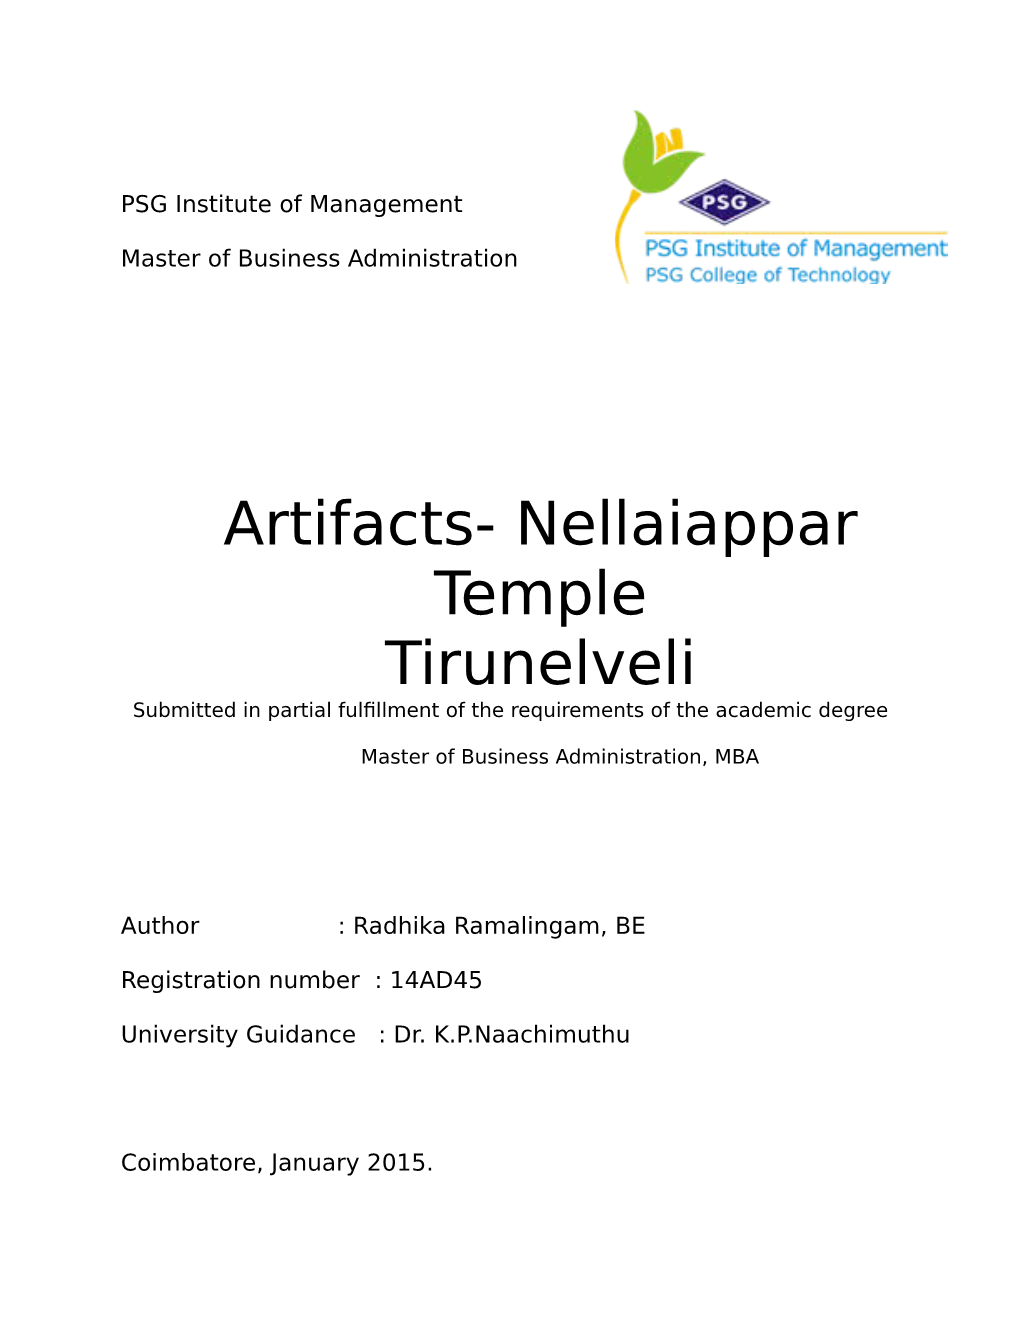 Artifacts- Nellaiappar Temple Tirunelveli Submitted in Partial Fulfillment of the Requirements of the Academic Degree